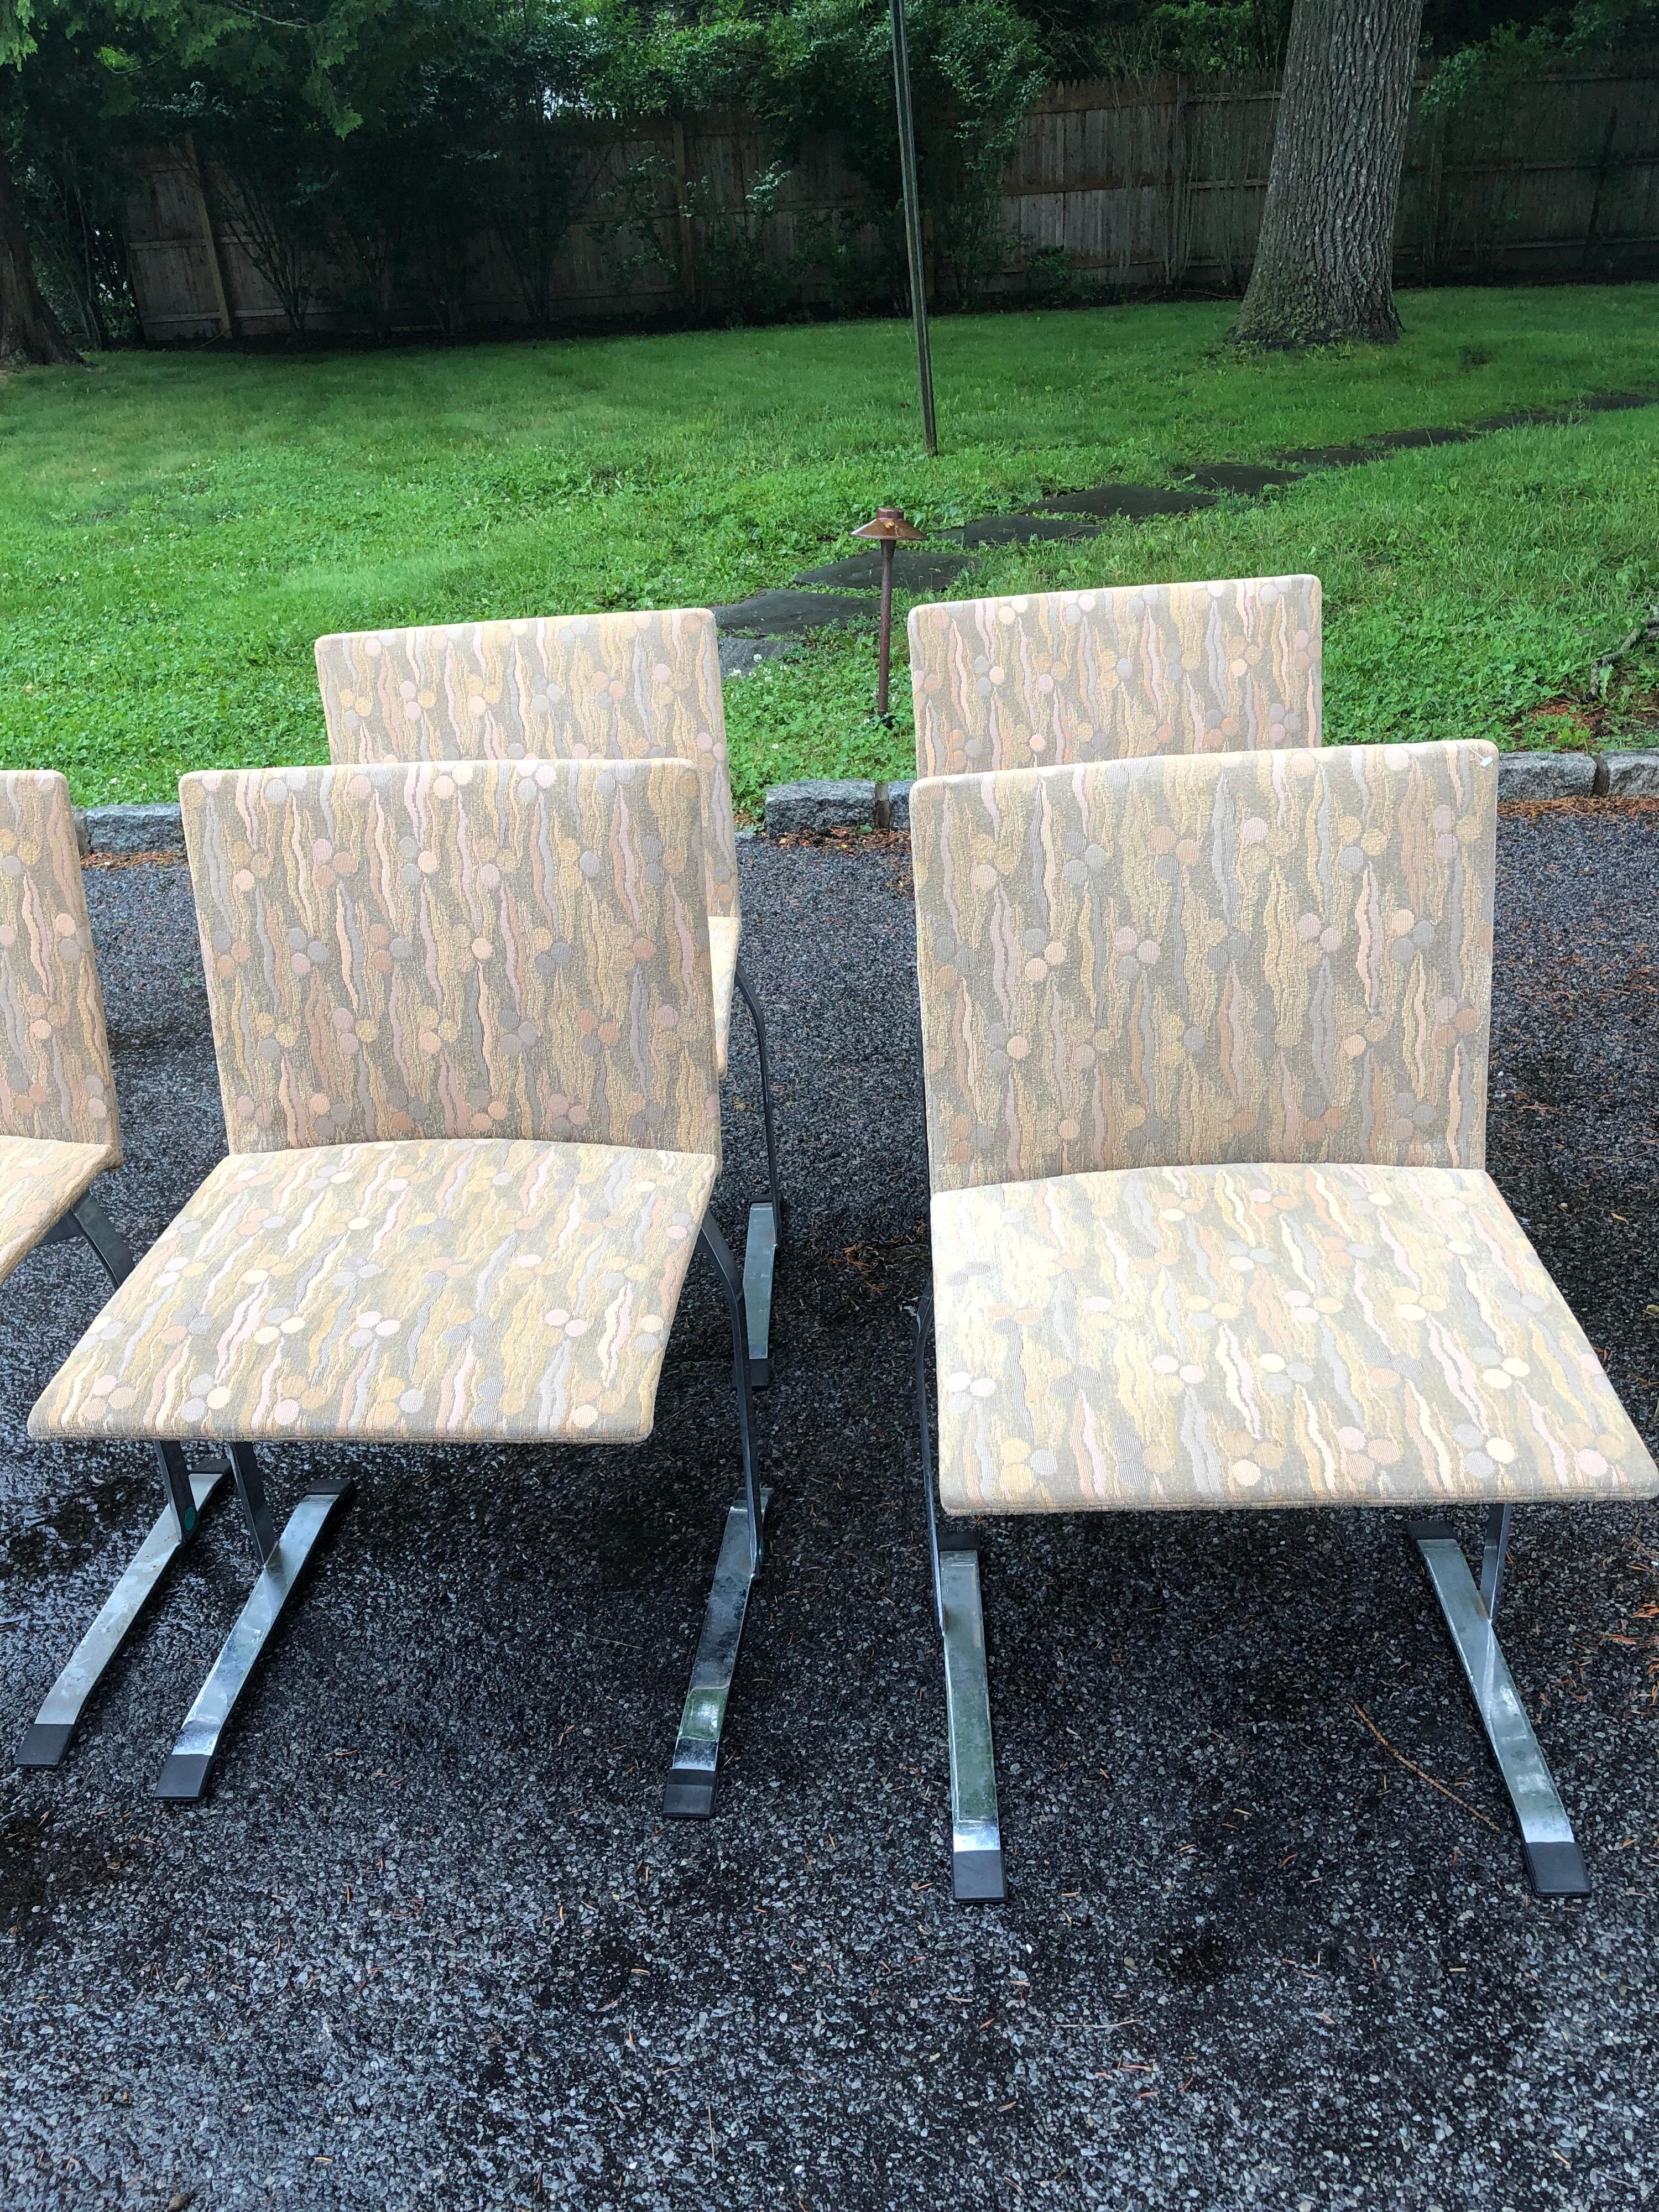 1970s set of five dining chairs by Giovanni Offredi for Saporiti Upholstered in Original Jack Lenor Larsen's designed
Fabric, chrome and steel legs. Signed.